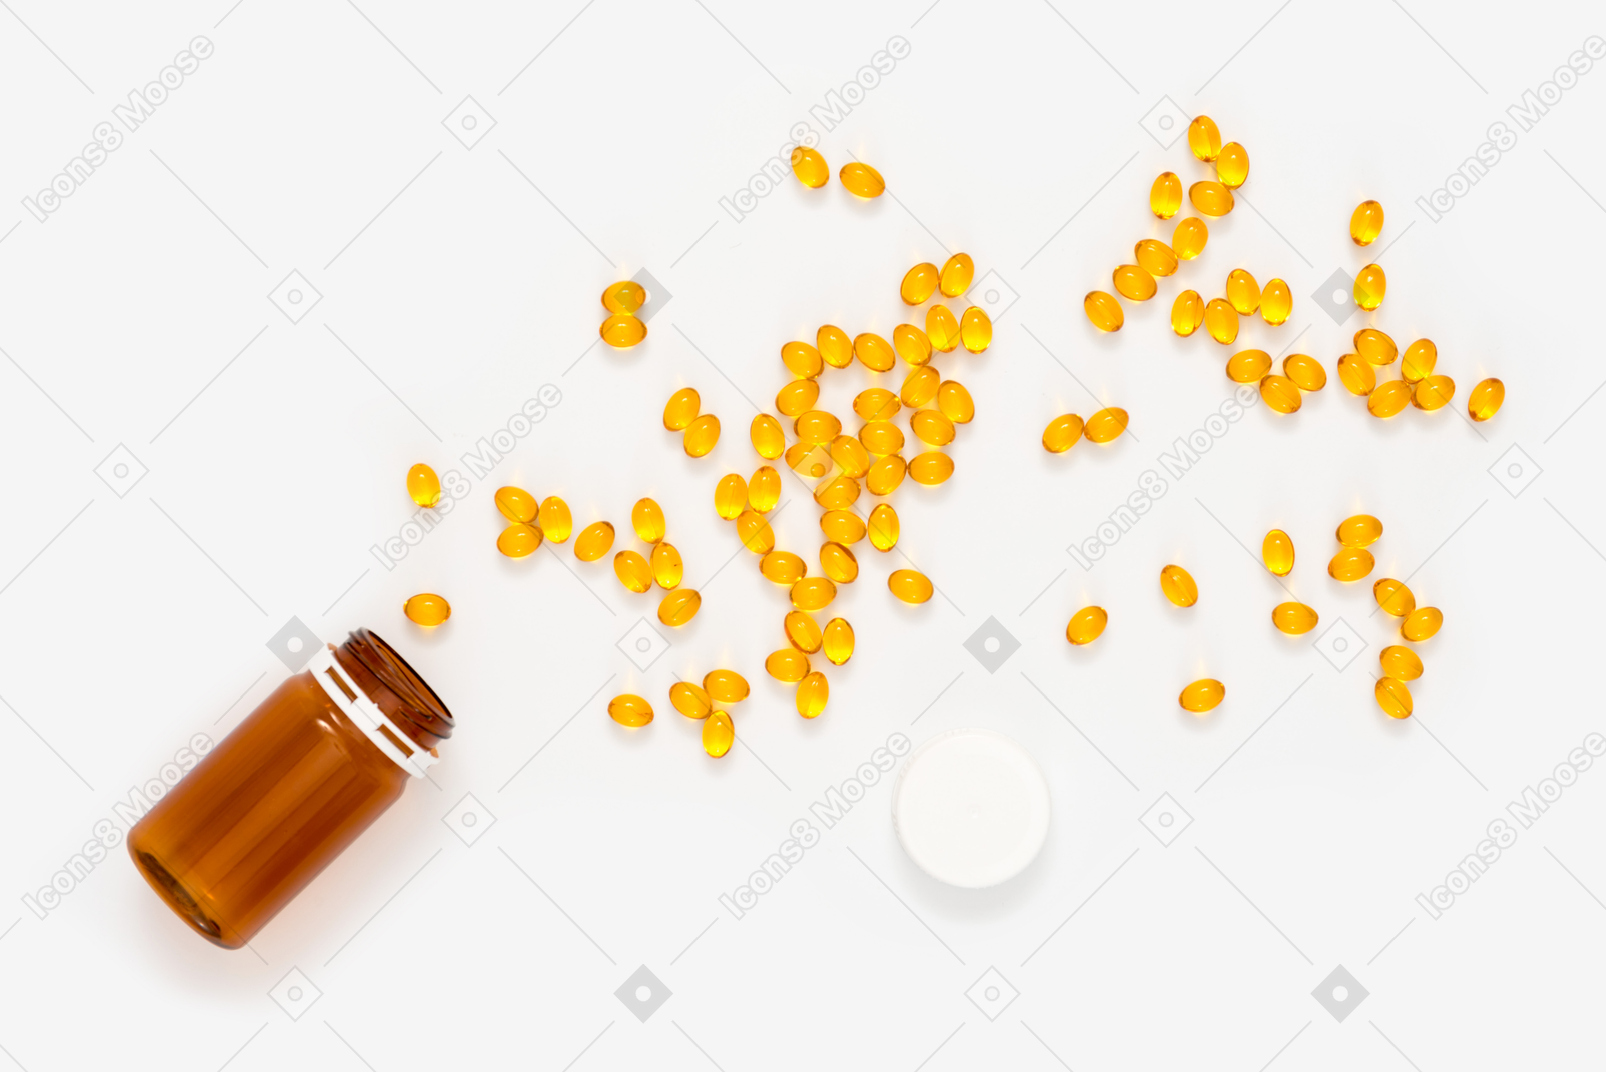 Scattered yellow pills